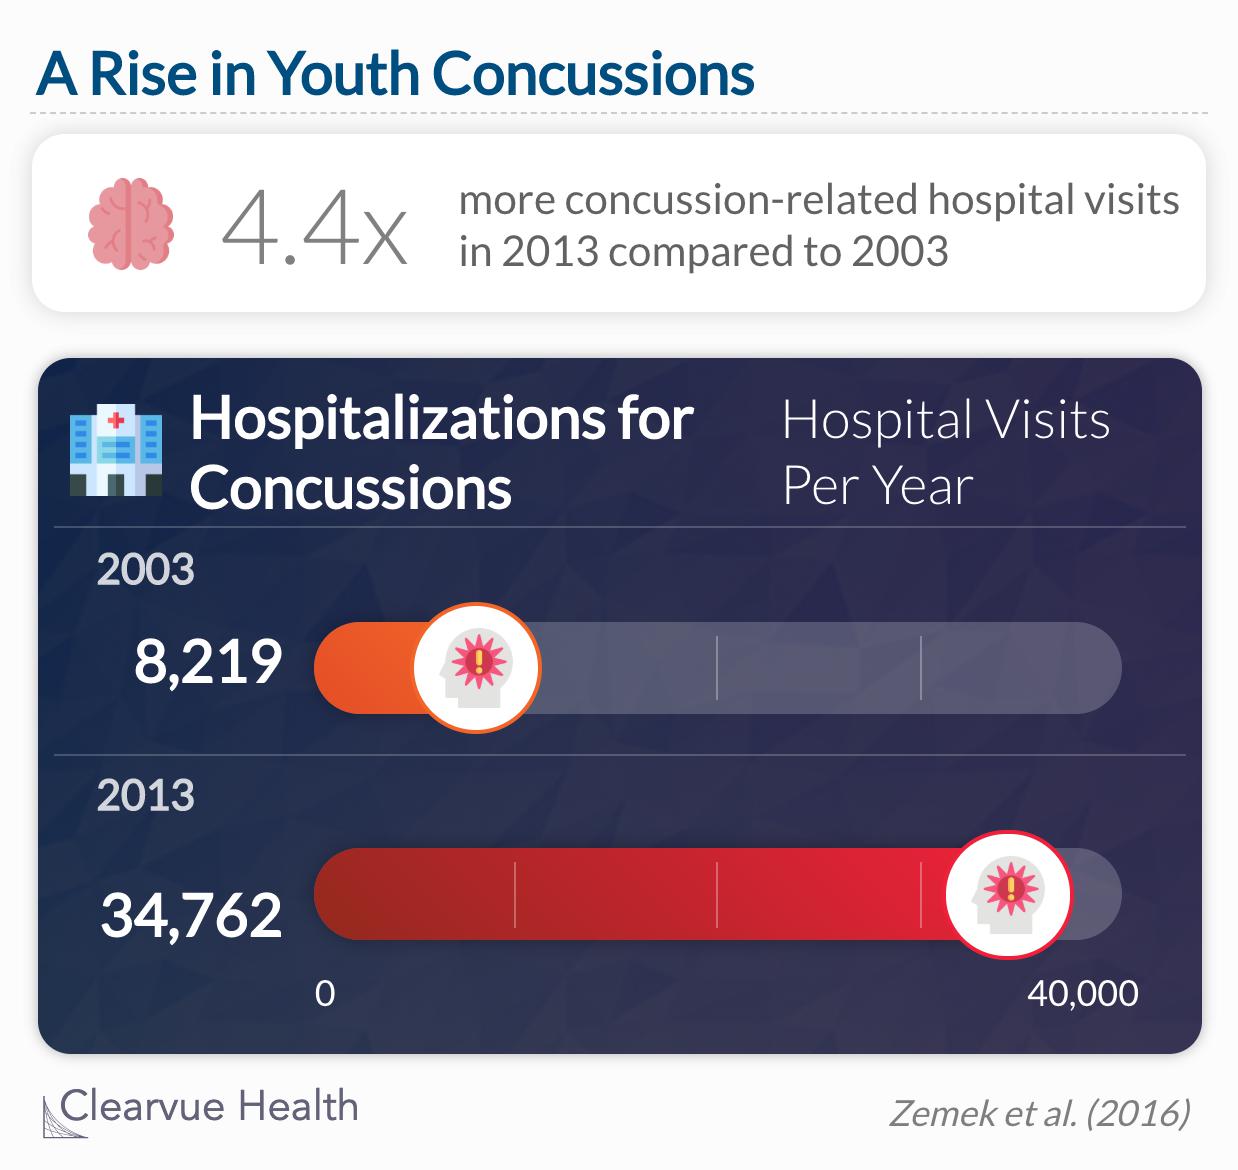 The number of concussion-related hospital visits multiplied by 4.4x between 2003 and 2013. 